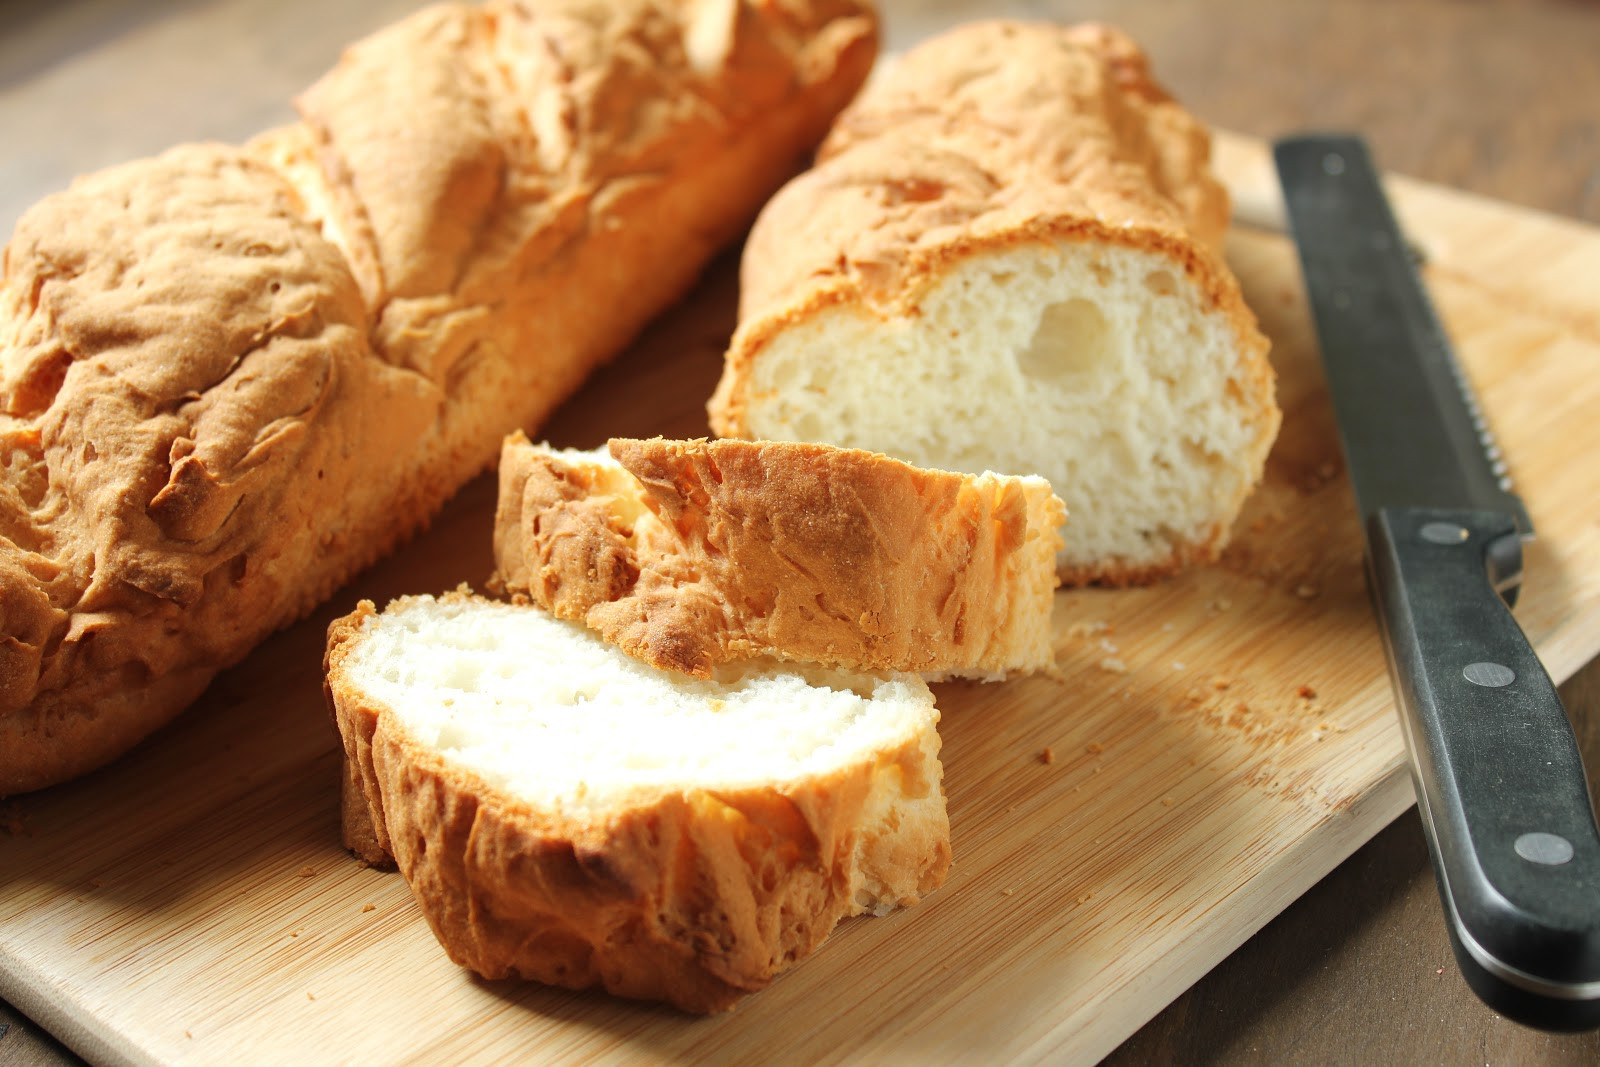 Gluten Free French Bread Recipe Awesome Delicious as It Looks Awesome Gluten Free French Bread